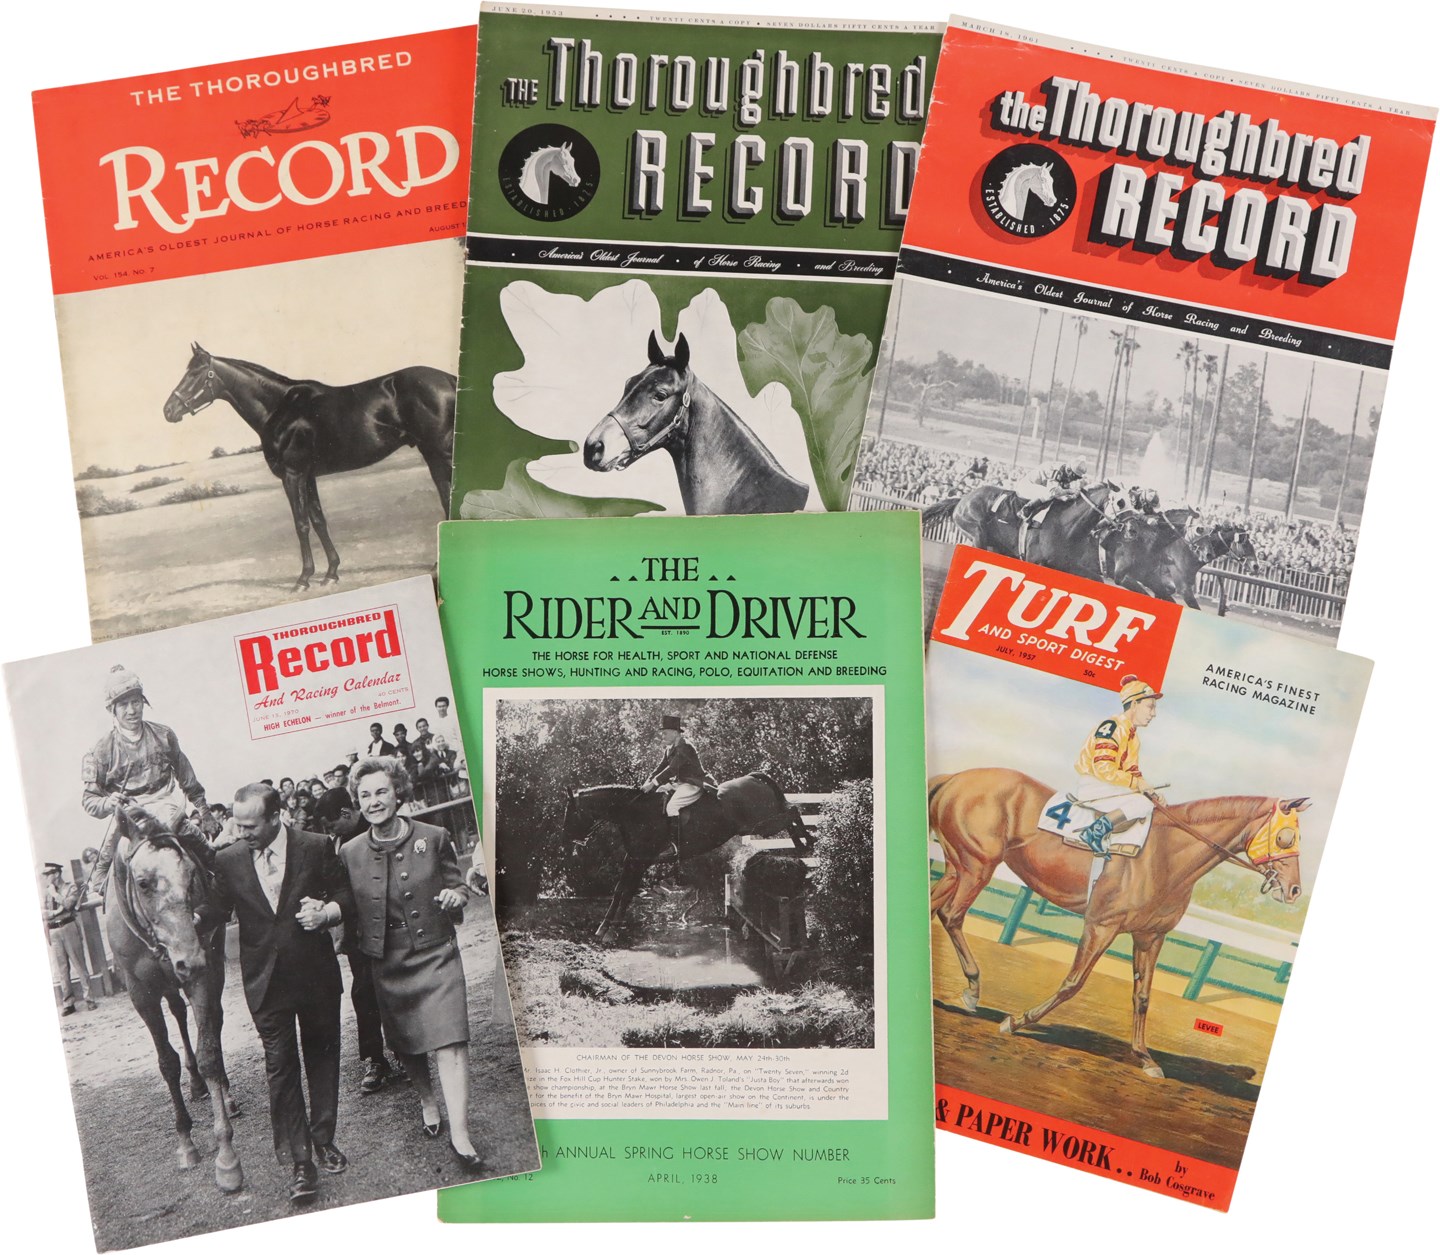 Magazines, Journals, Books, Etc., Featuring Articles and Photos of Important Racehorses, Races, Racetracks, and Jockeys of a Bygone Era (21)